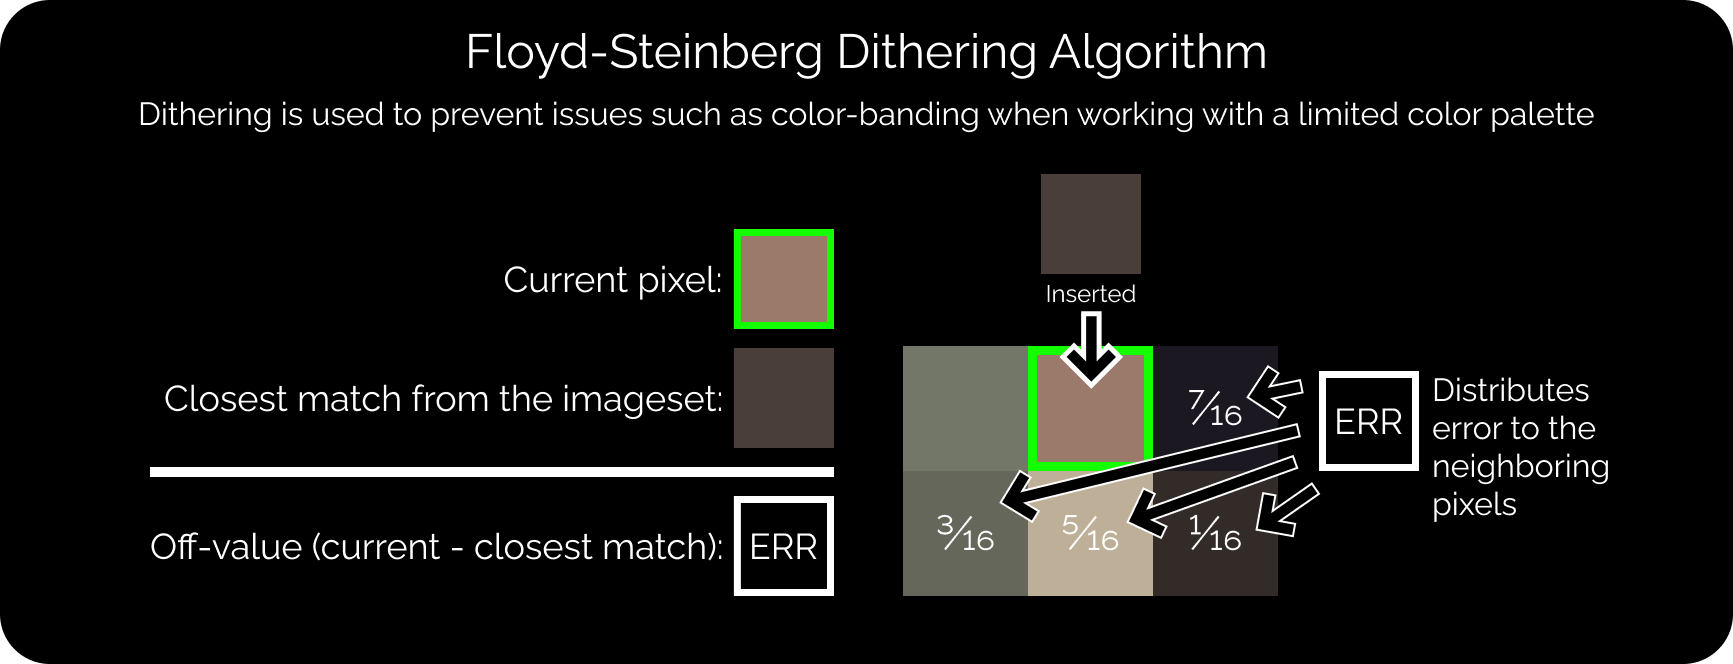 An explanation of Floyd-Steinberg dithering